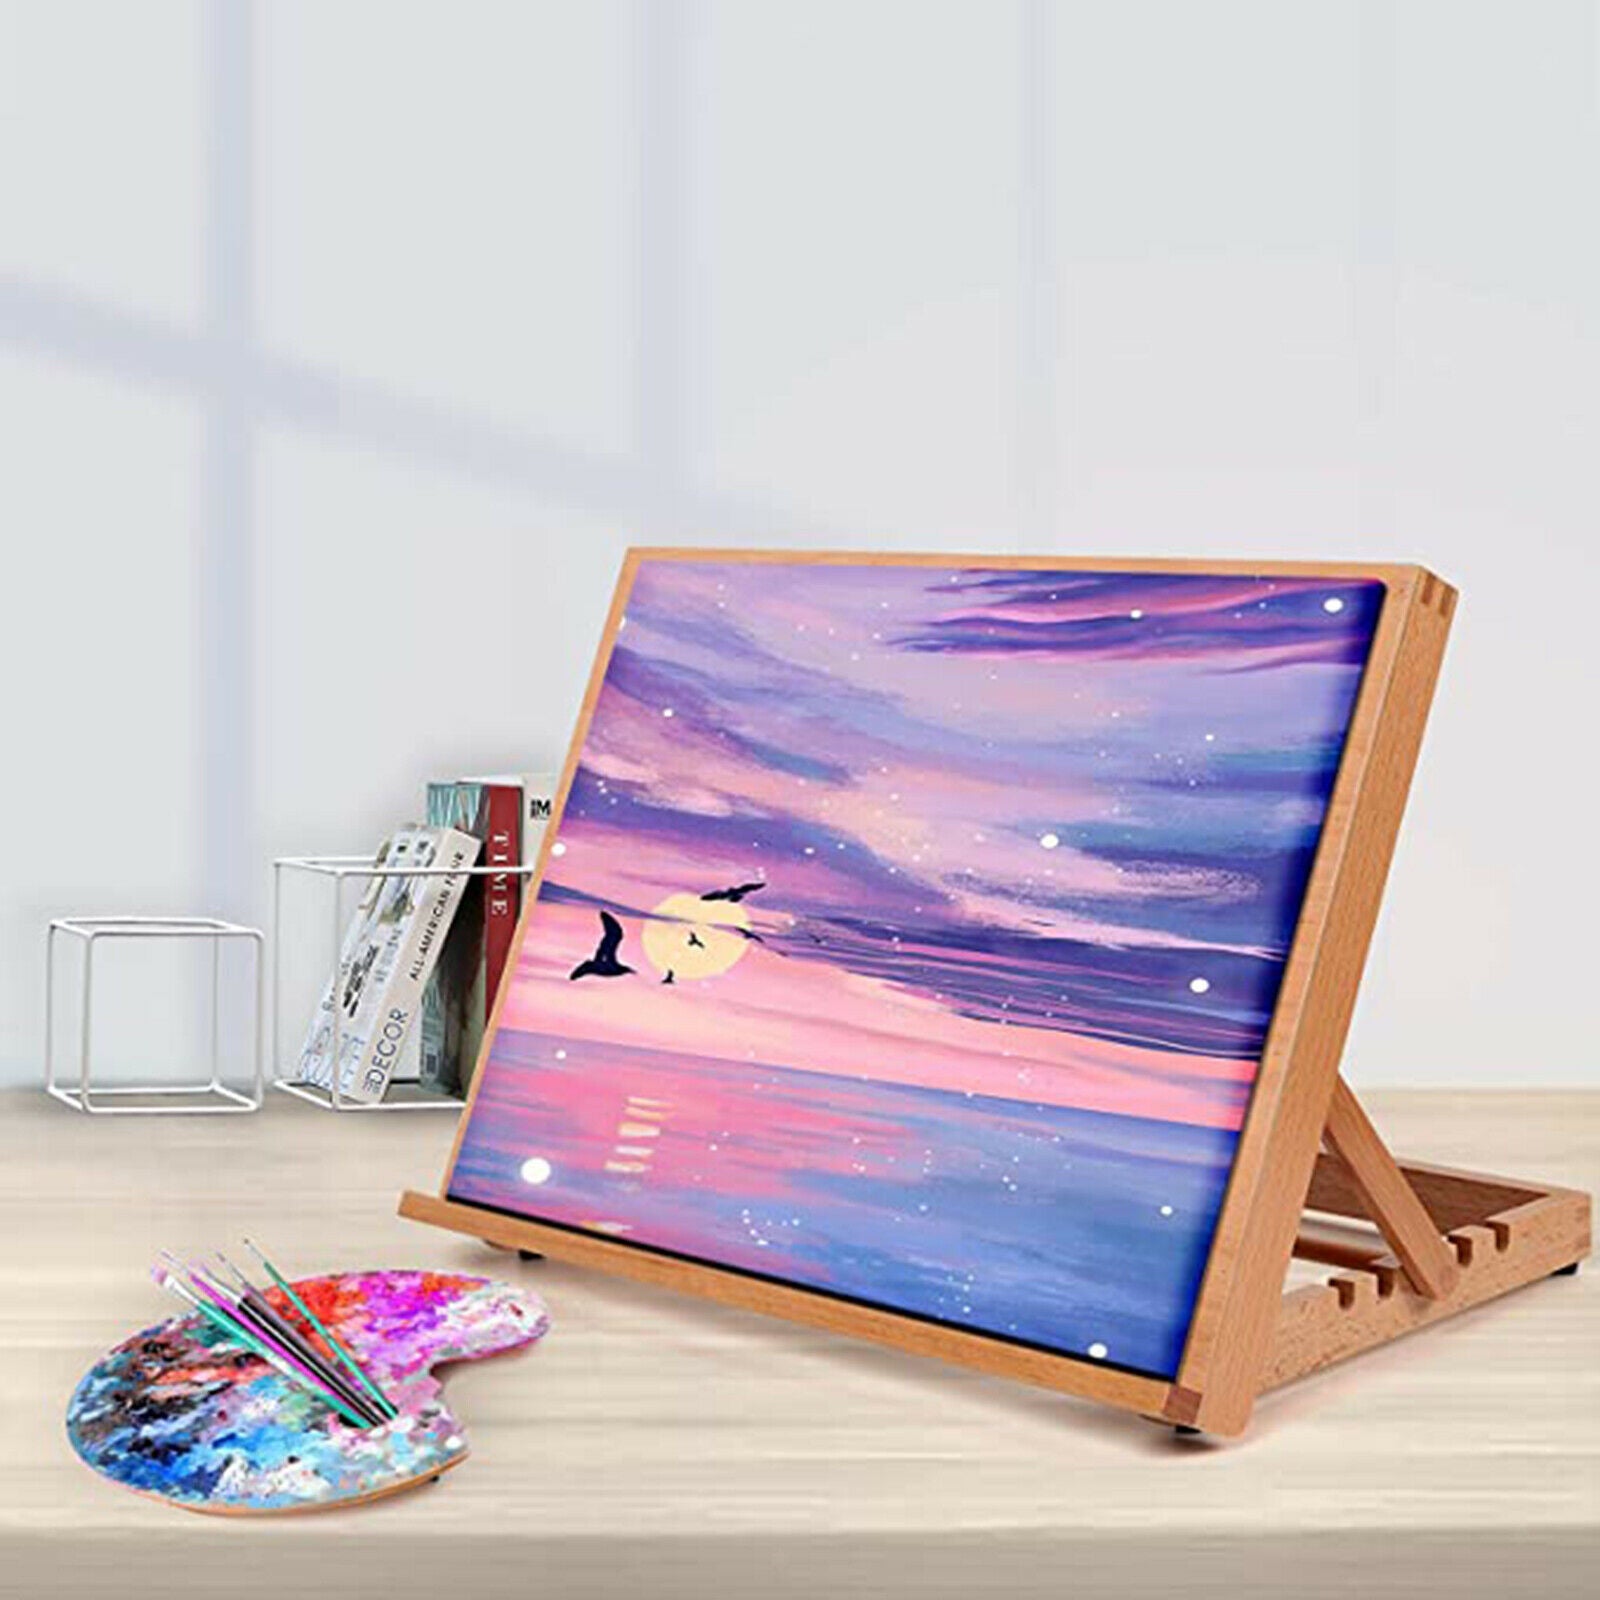 Drawing Sketching Board Portable Large Beechwood Table Easel Oil Painting